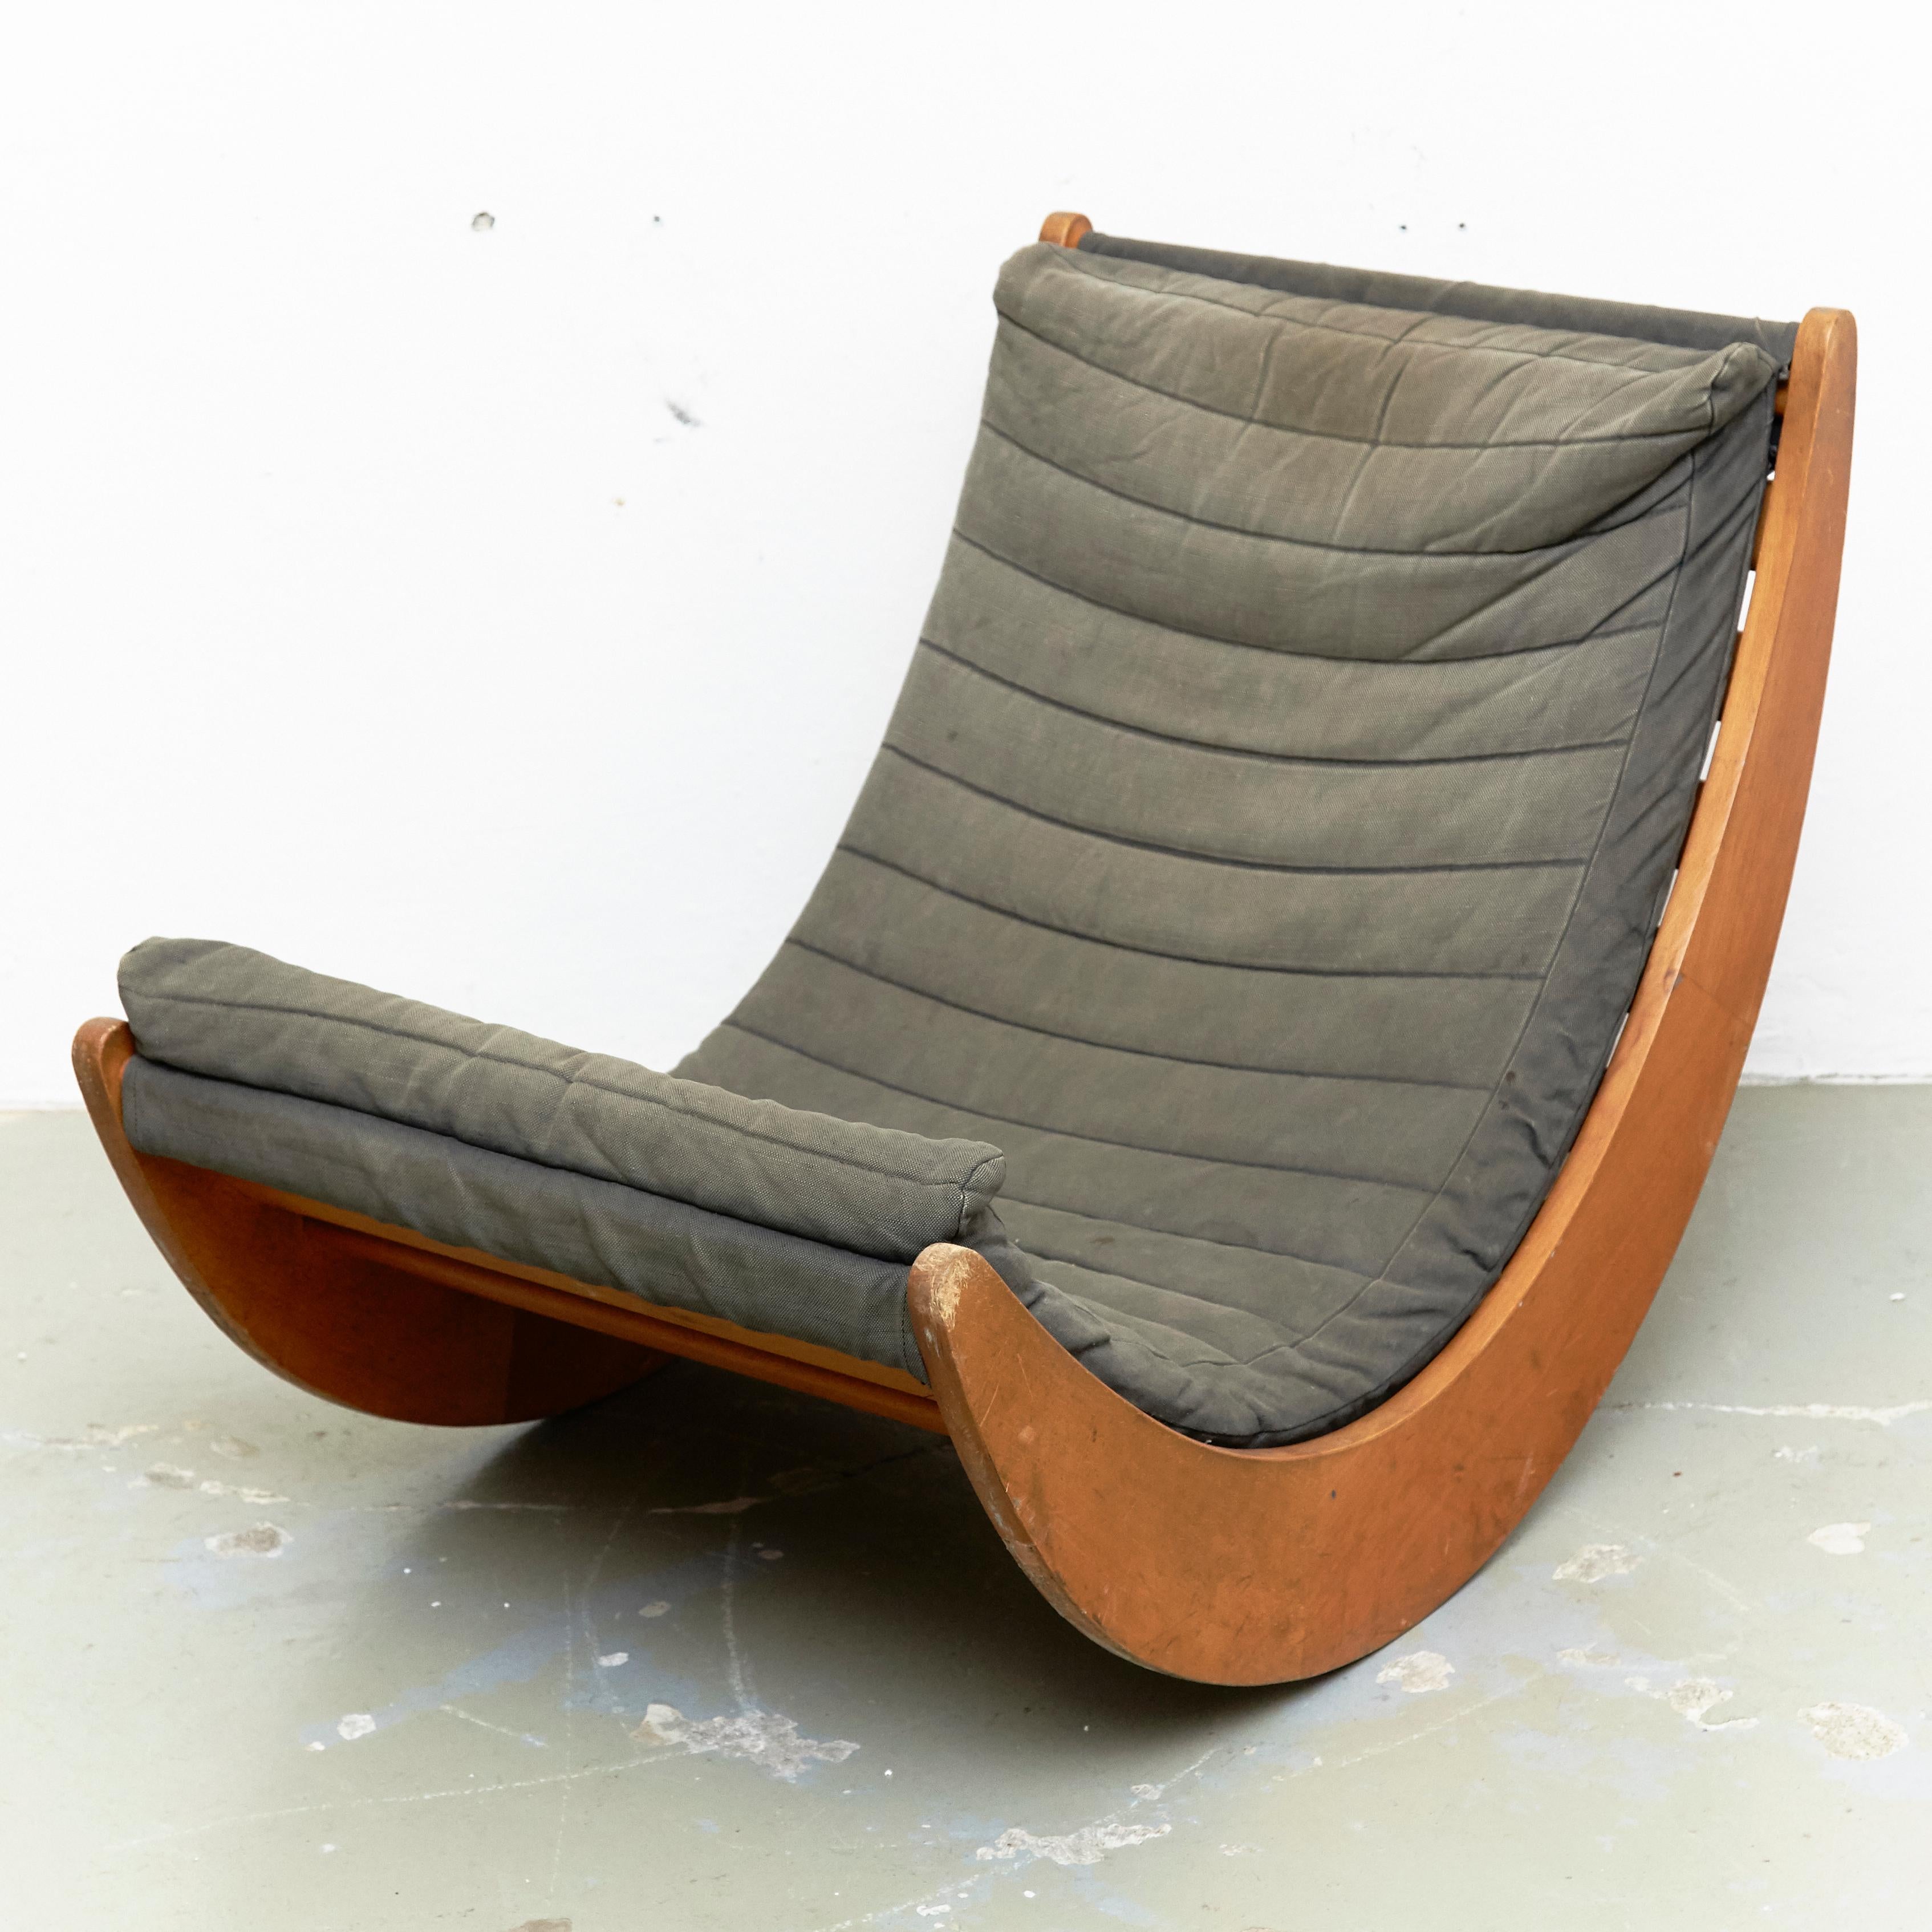 Relaxer chair designed by Verner Panton circa 1970, manufactured for Rosenthal in Denmark.

In original condition, with minor wear consistent with age and use, preserving a beautiful patina. The wood has some scratches and the upholstery has some